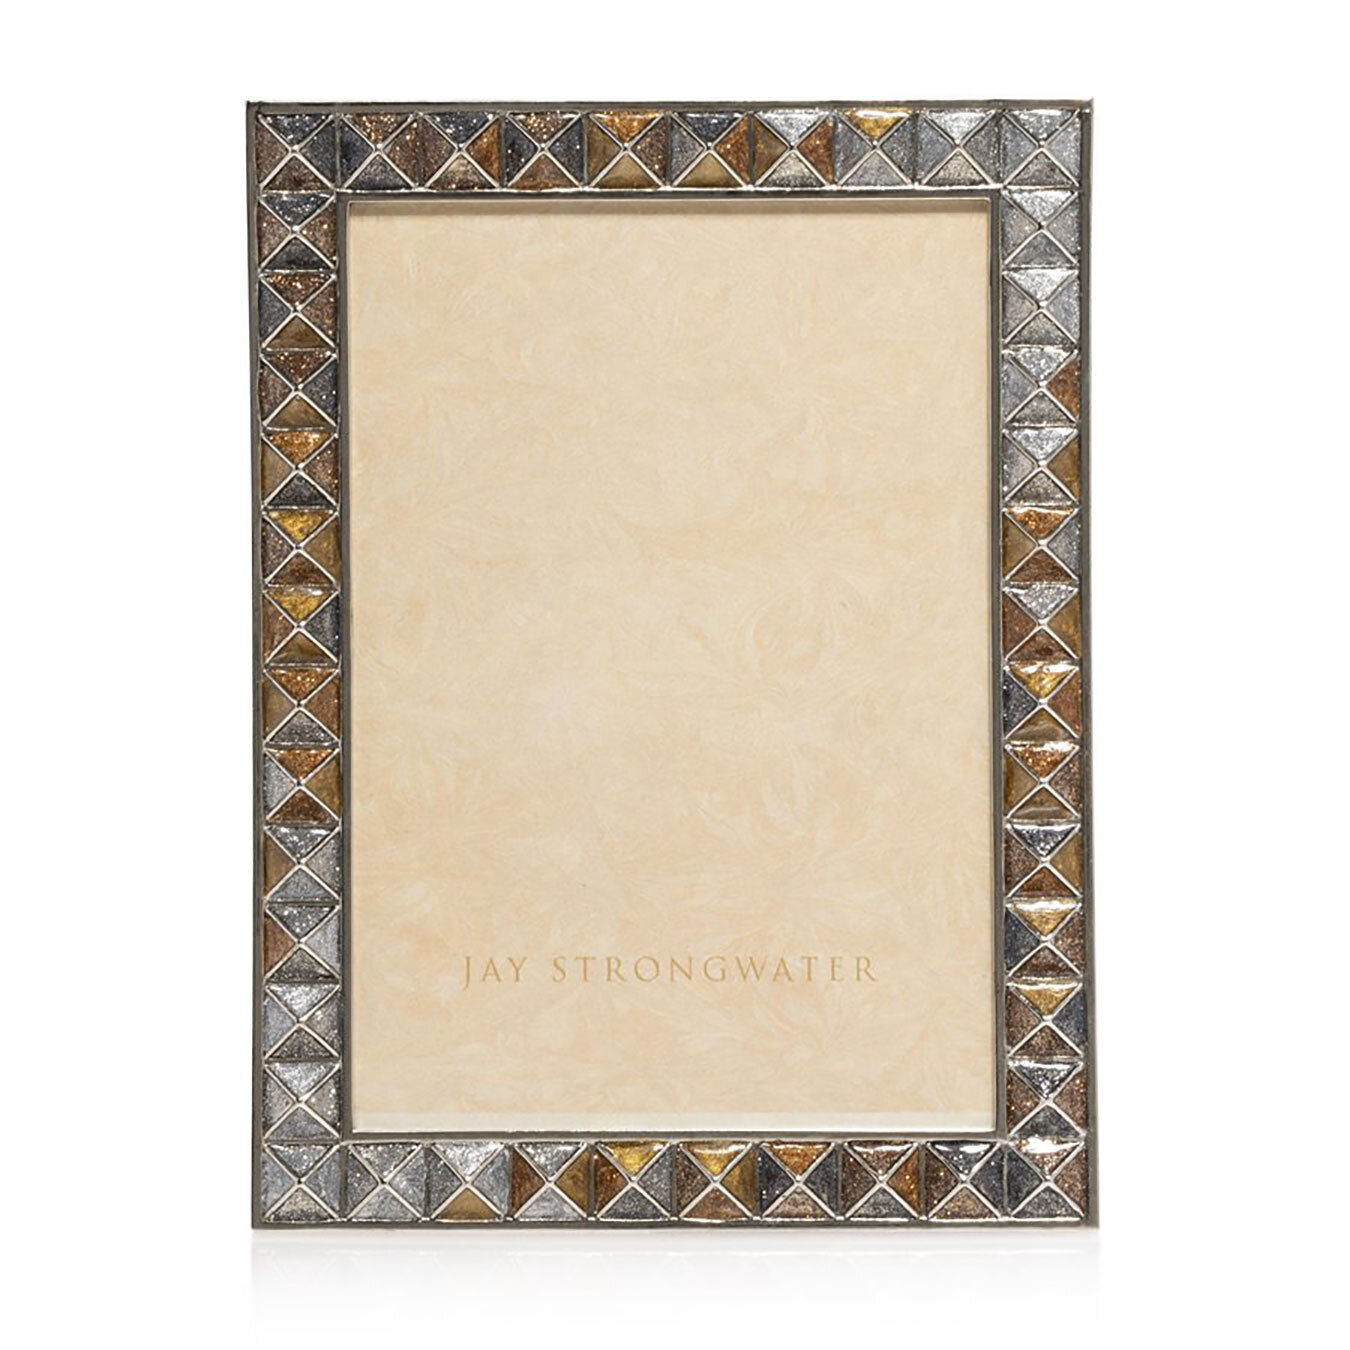 Jay Strongwater Pyramid 5 X 7 Inch Picture Frame SPF5877-634